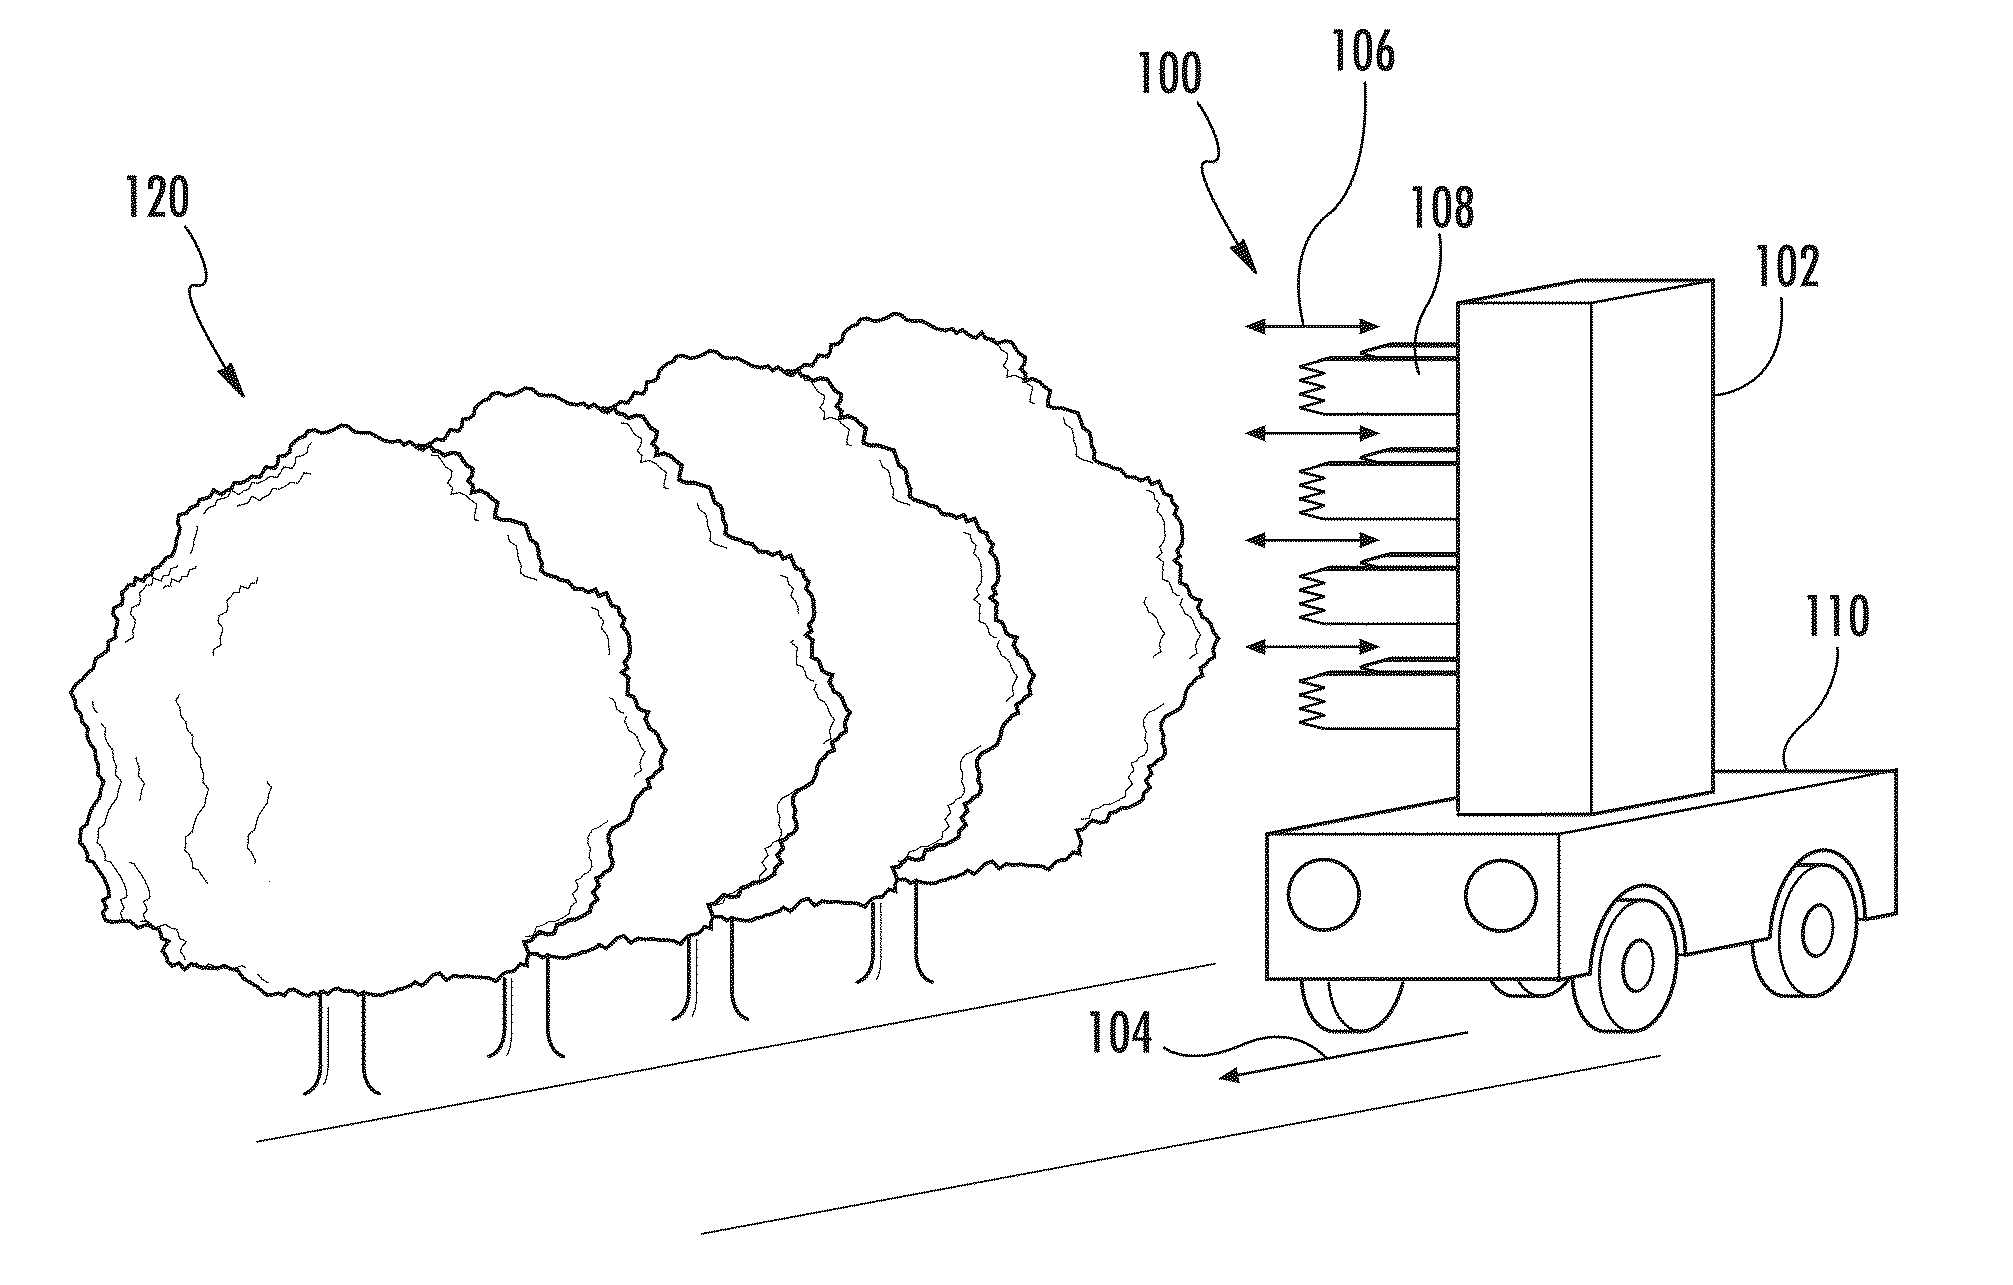 Computerized learning landscaping apparatus and methods